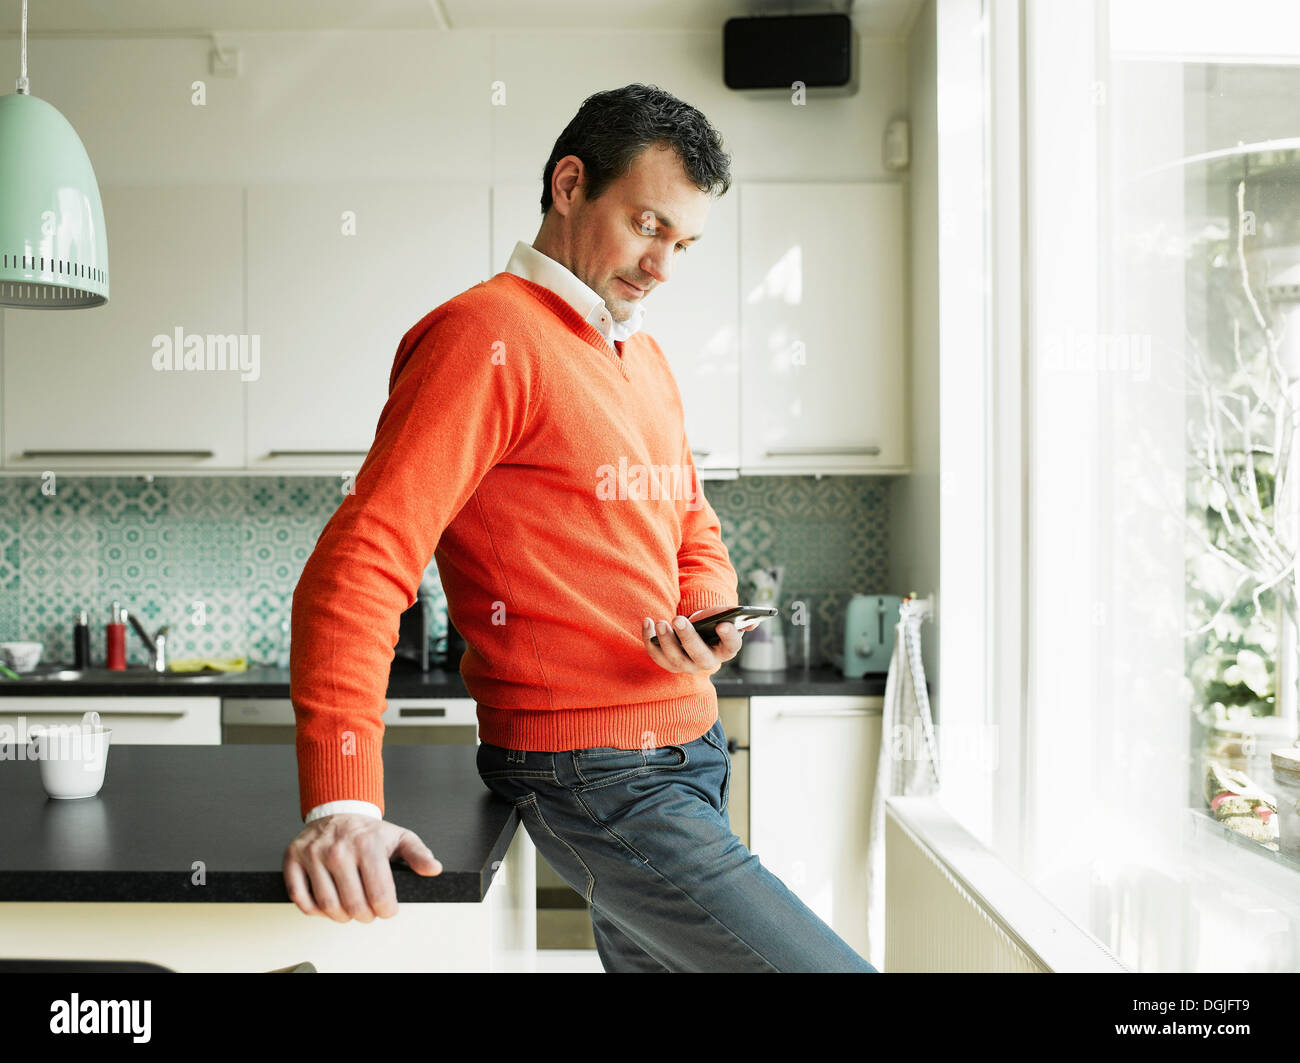 Mature man using cellphone in kitchen Stock Photo